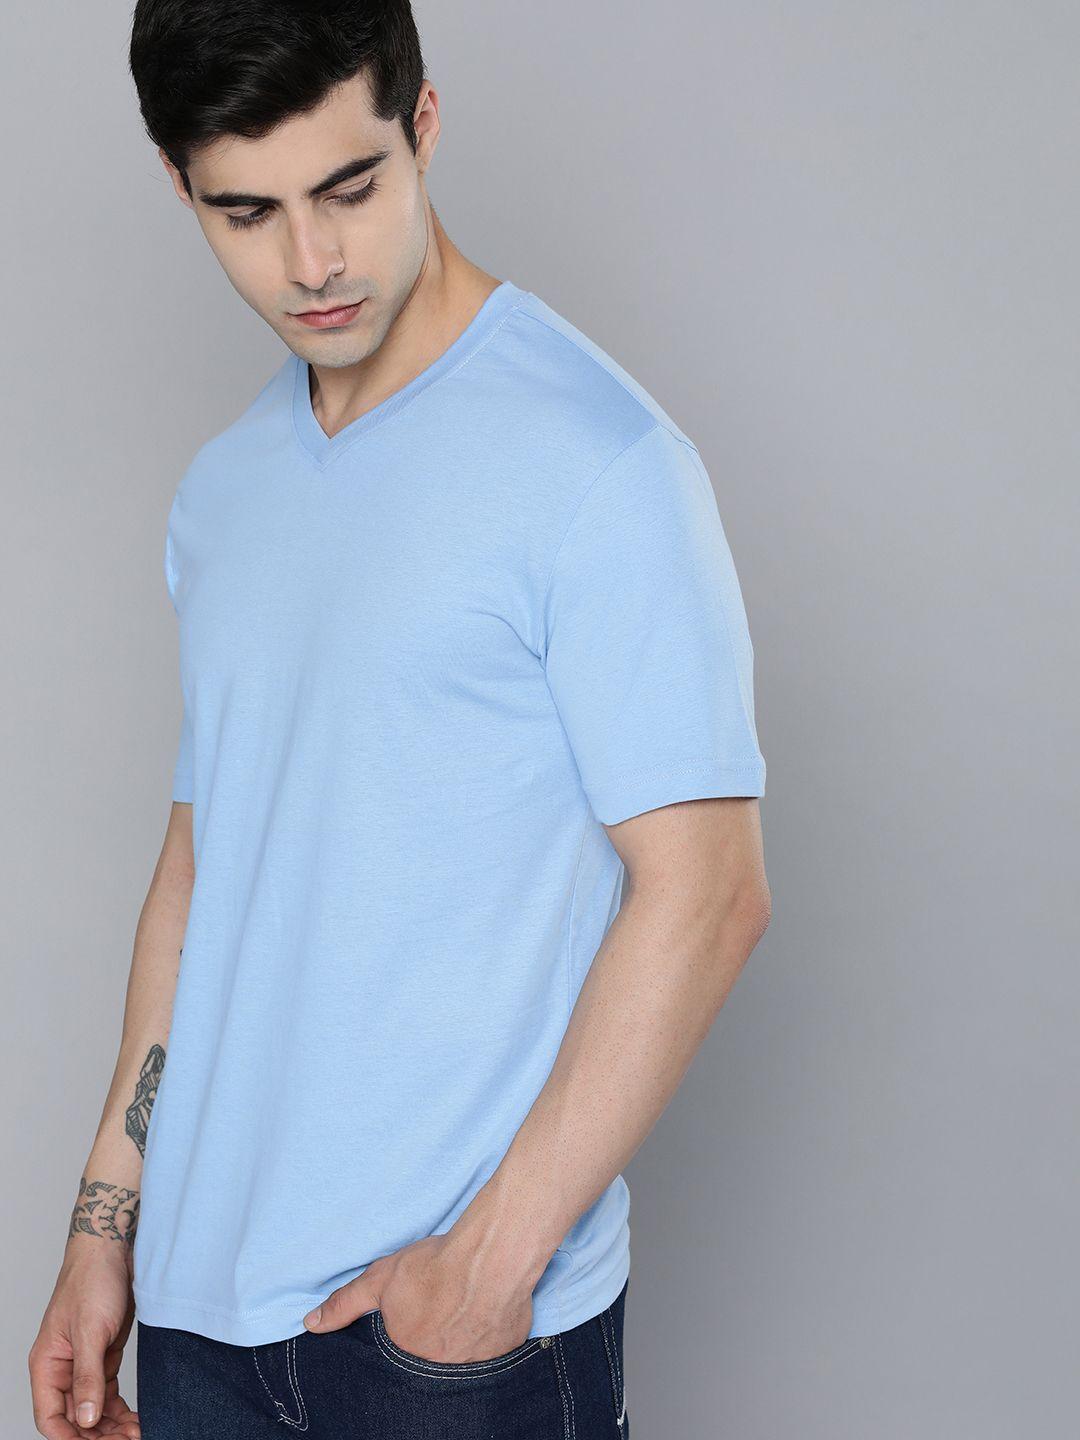 ether solid v-neck pure cotton t-shirt